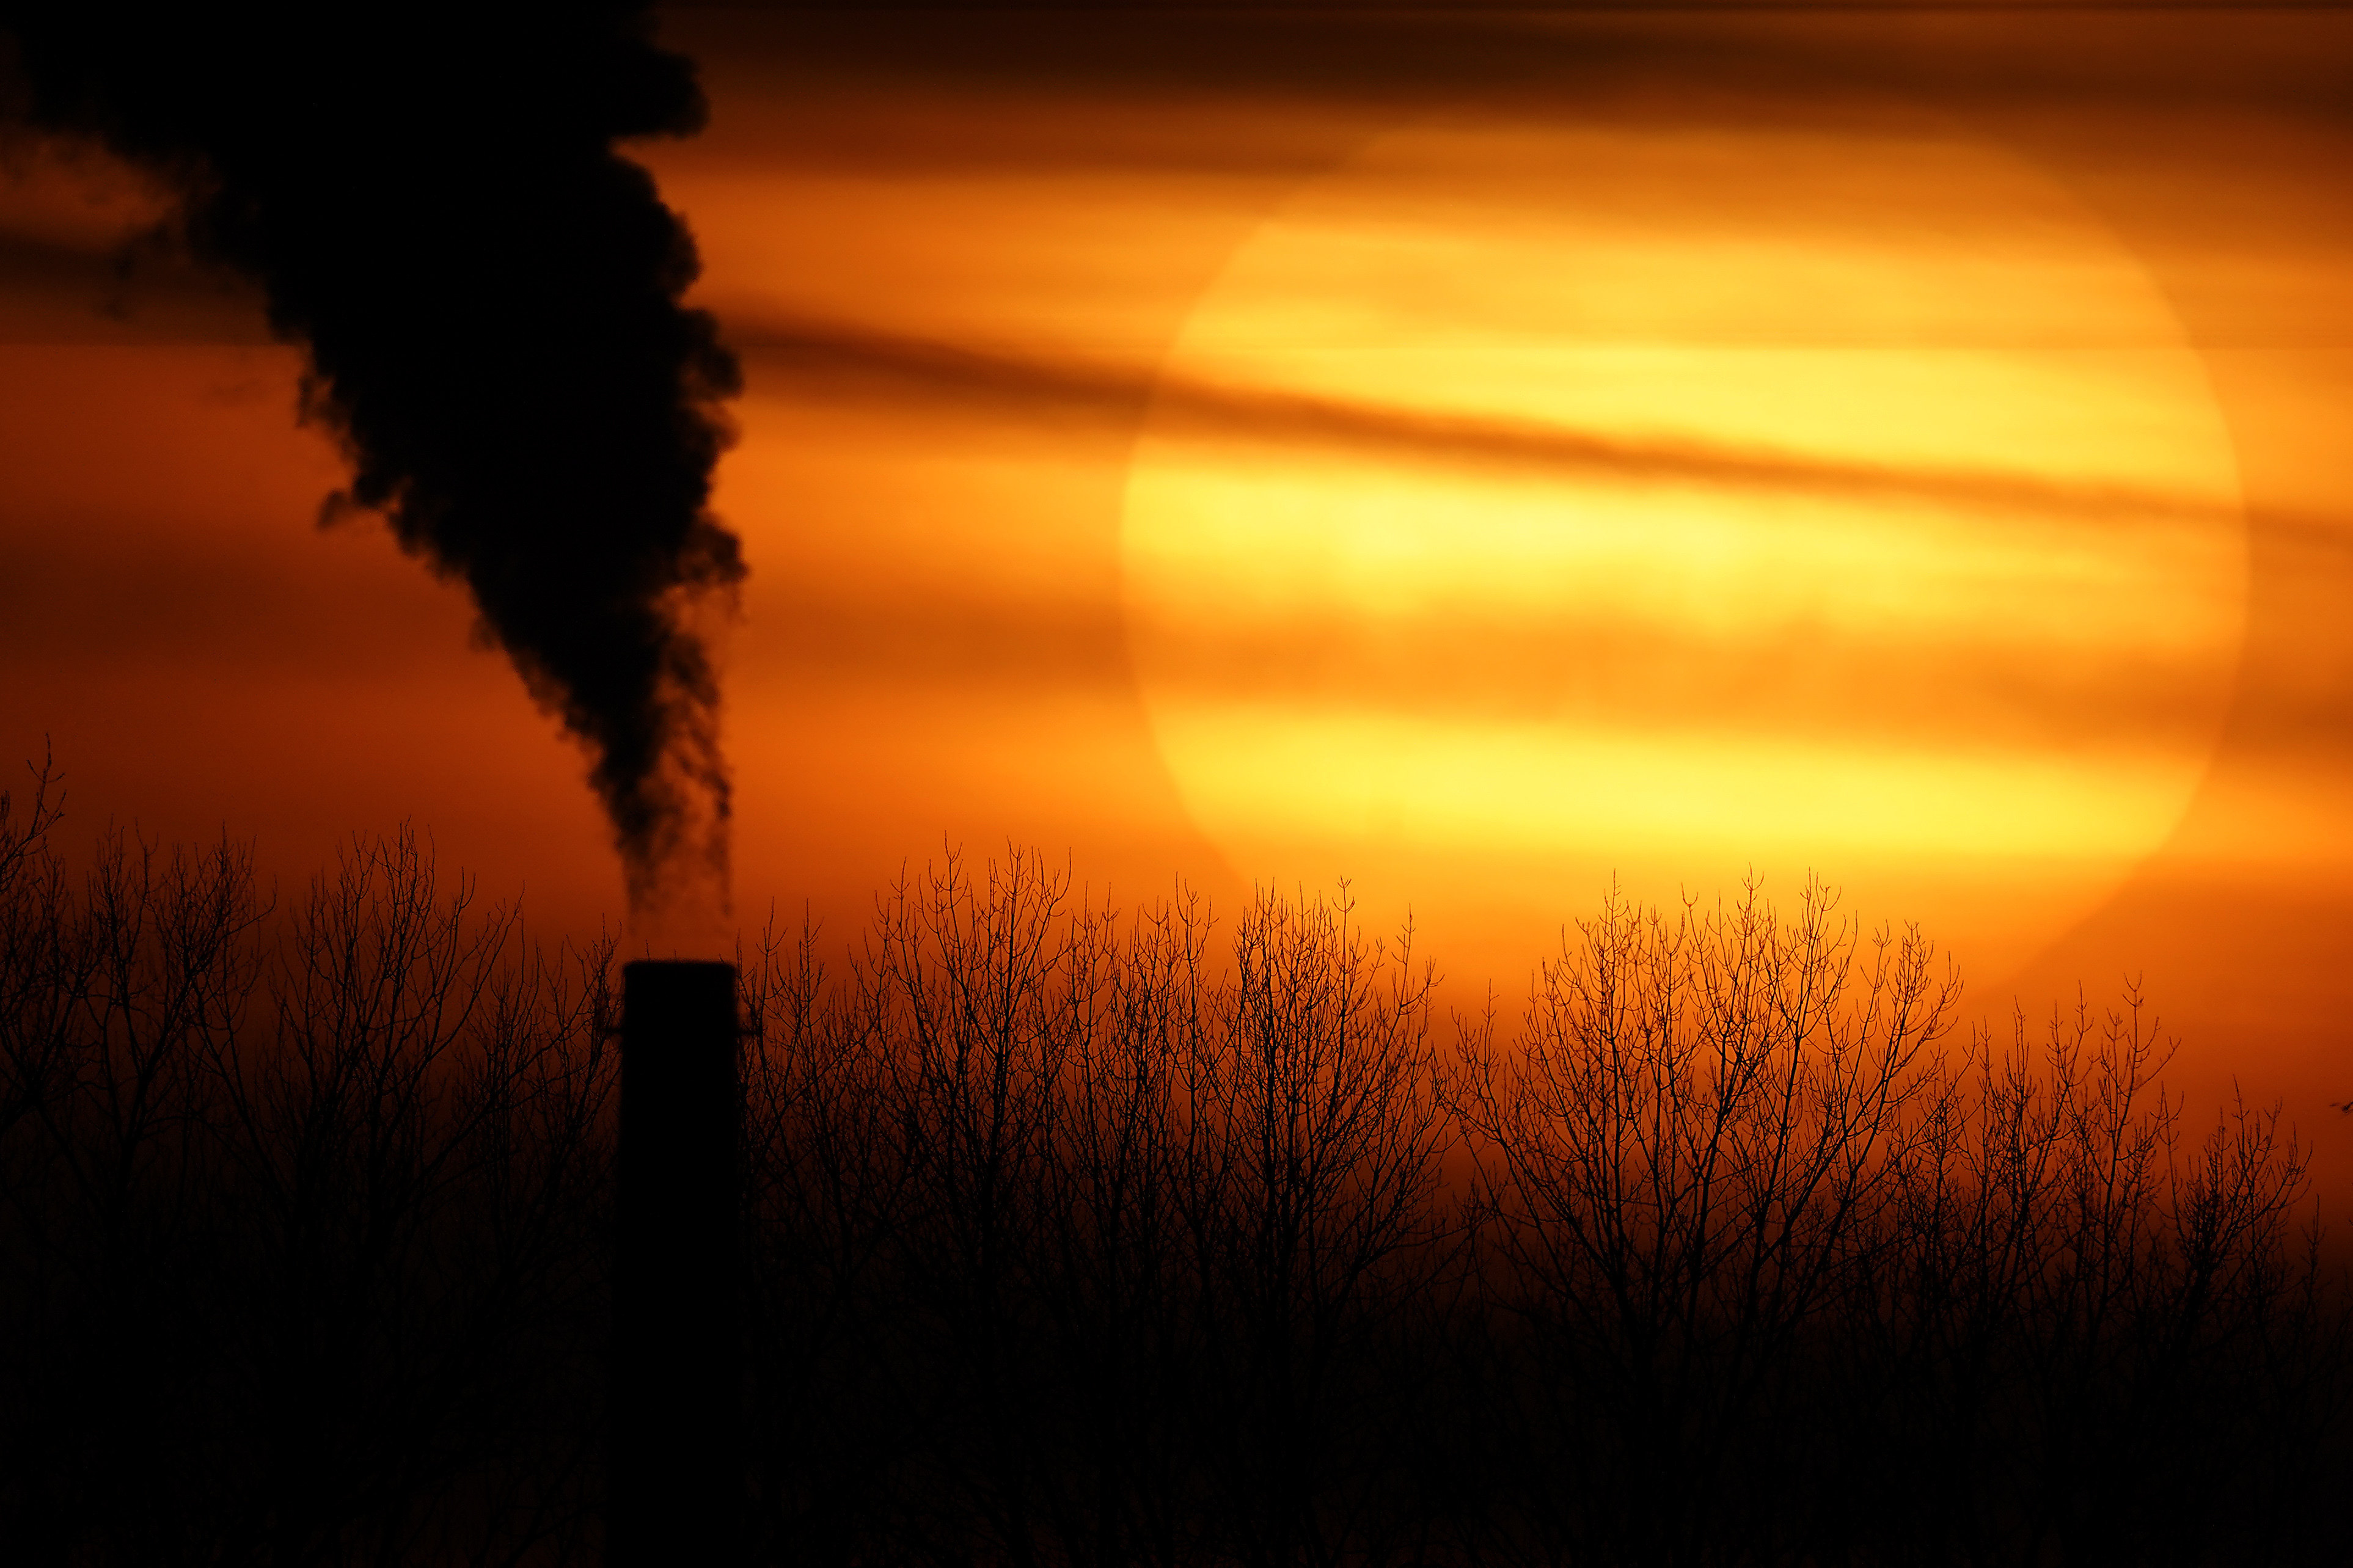 Greenhouse gas emissions from many sources including power plants are contributing to global warming. Photo: AP